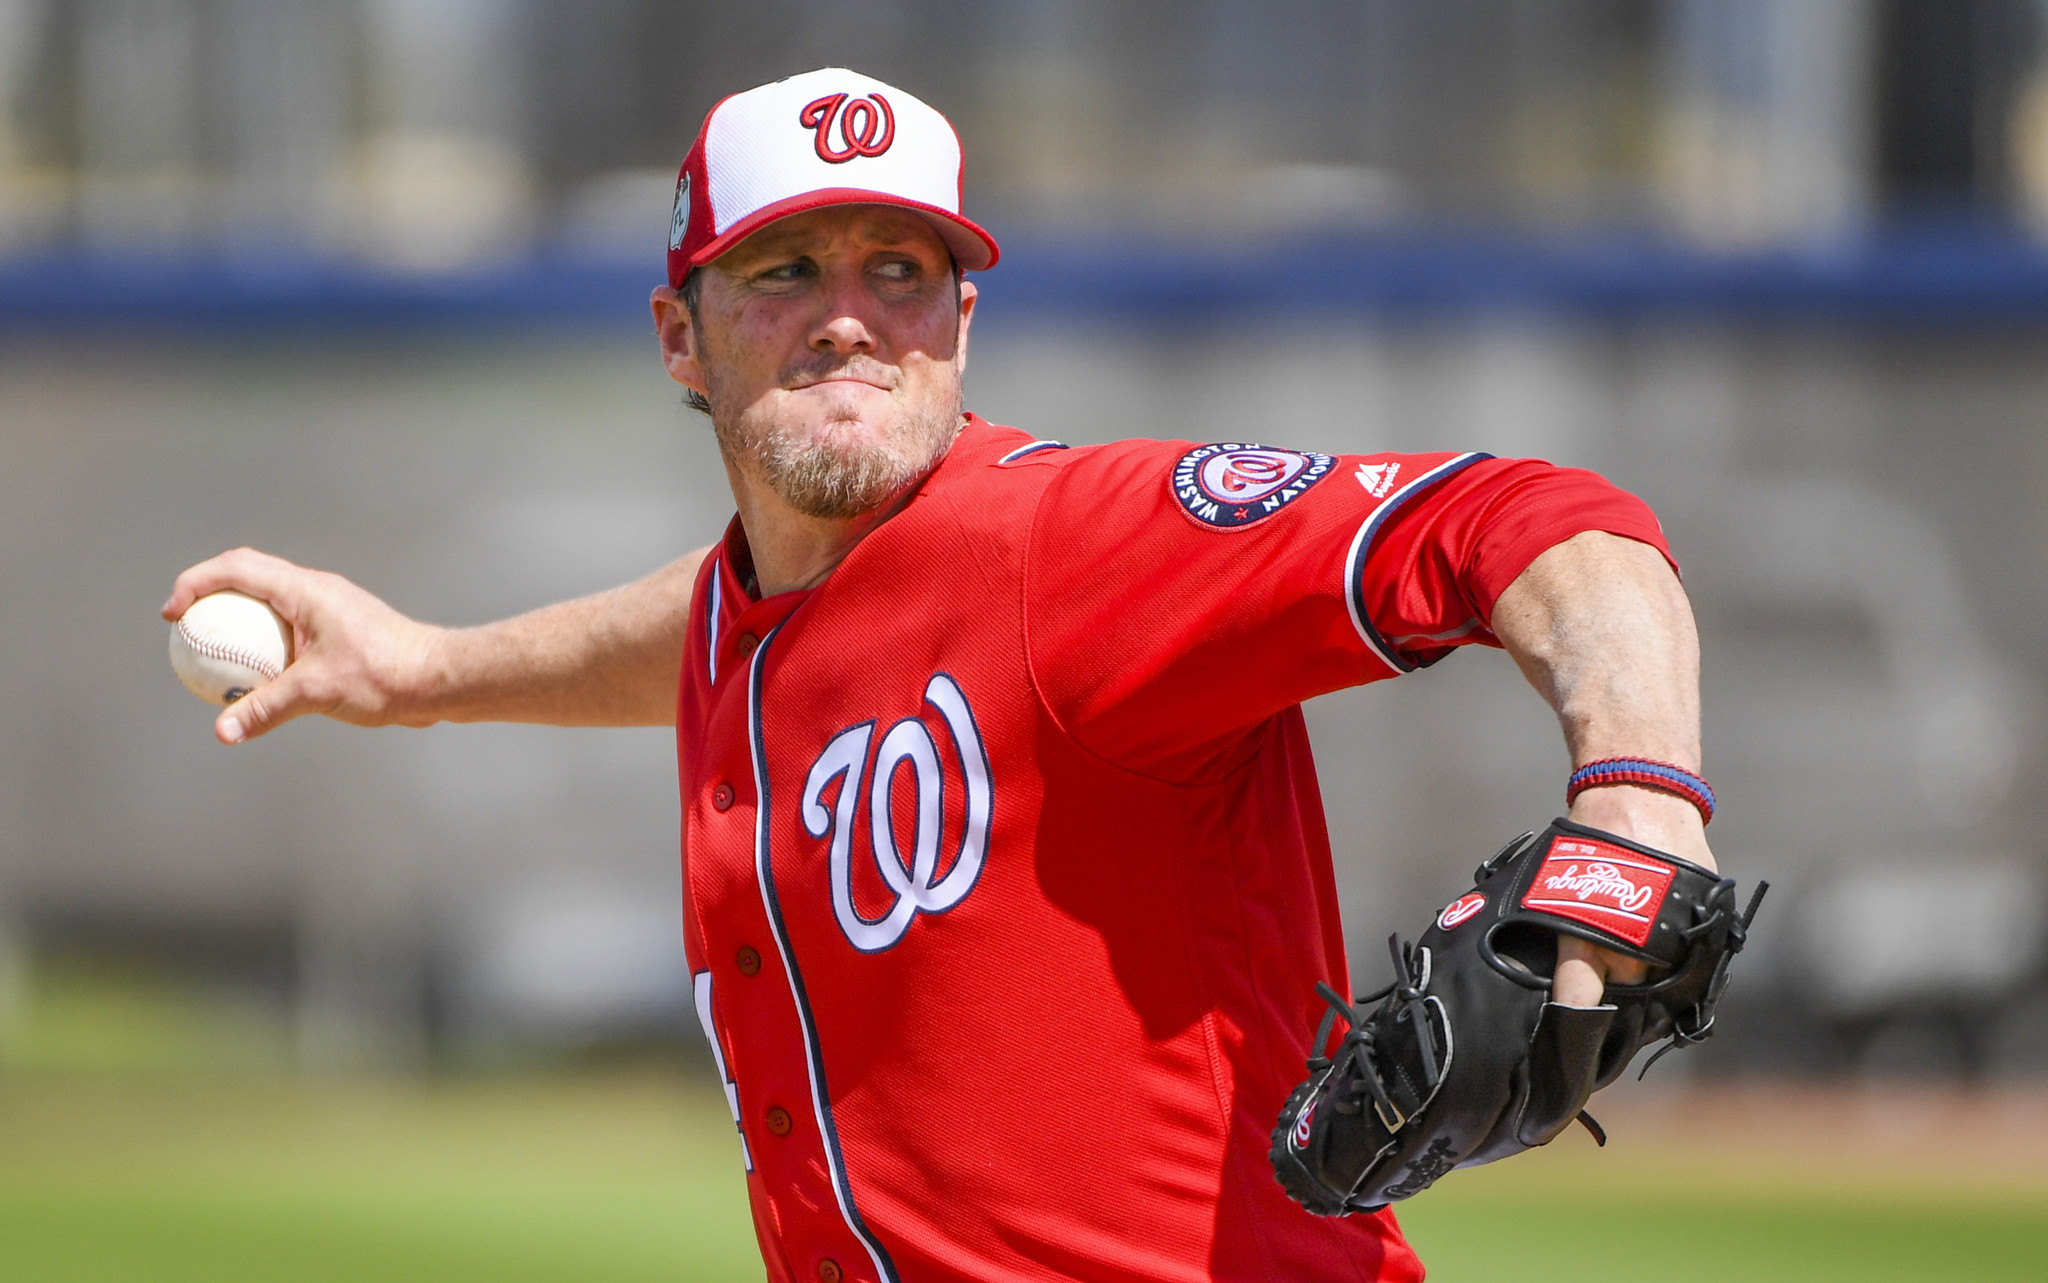 Nationals aren't counting on Joe Nathan to be elite again at 42, but they're intrigued ...